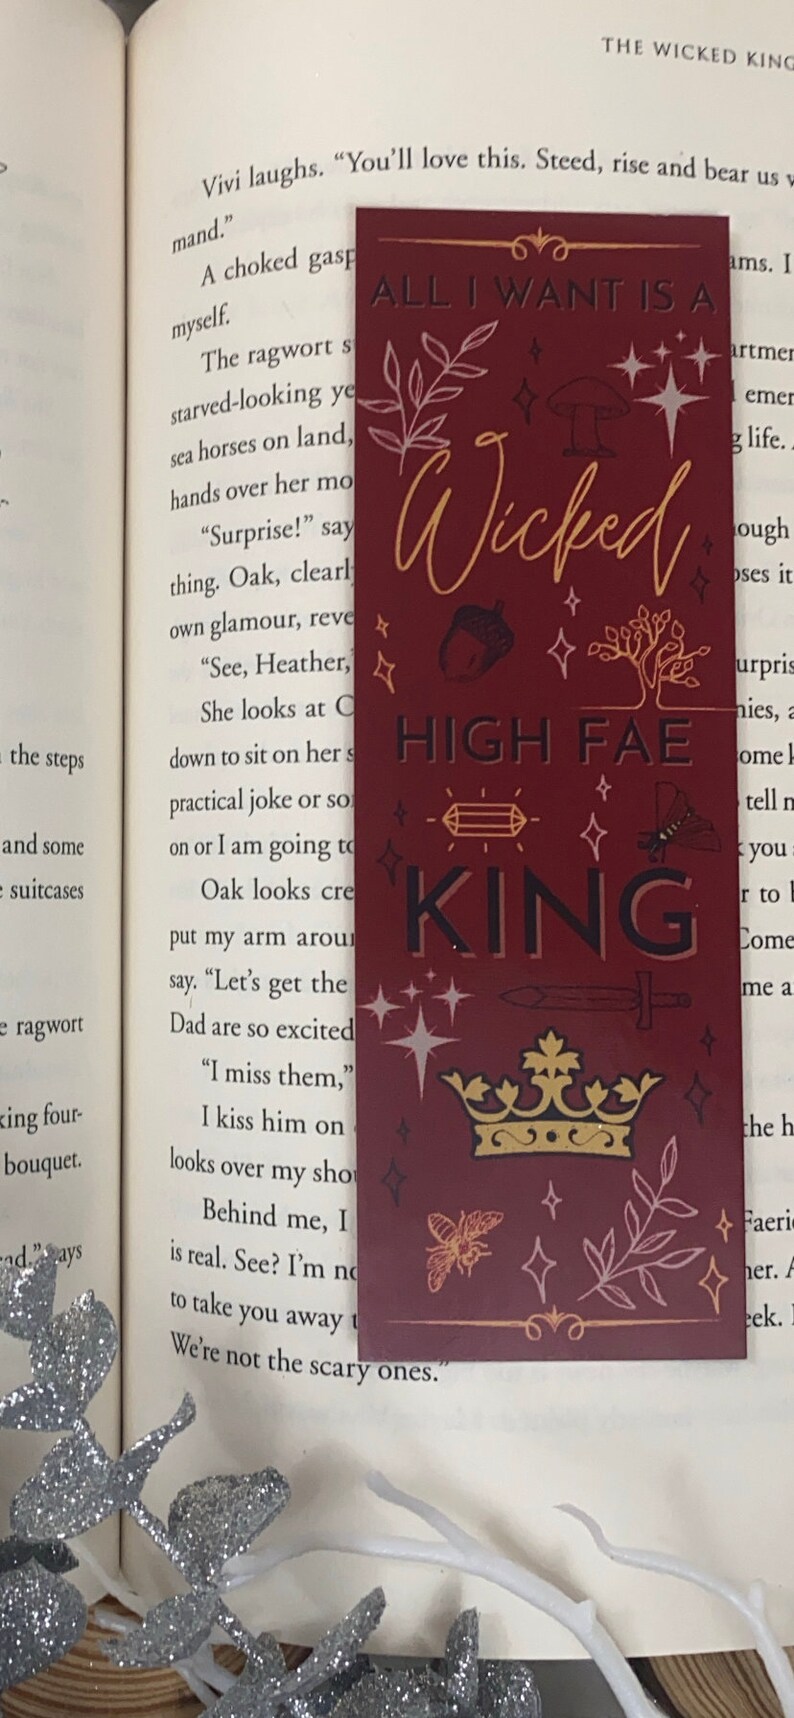 All I Want is a Wicked High Fae King BOOKMARK & BUNDLE option Black white red writer writer bookish bookworm booklover gift Red